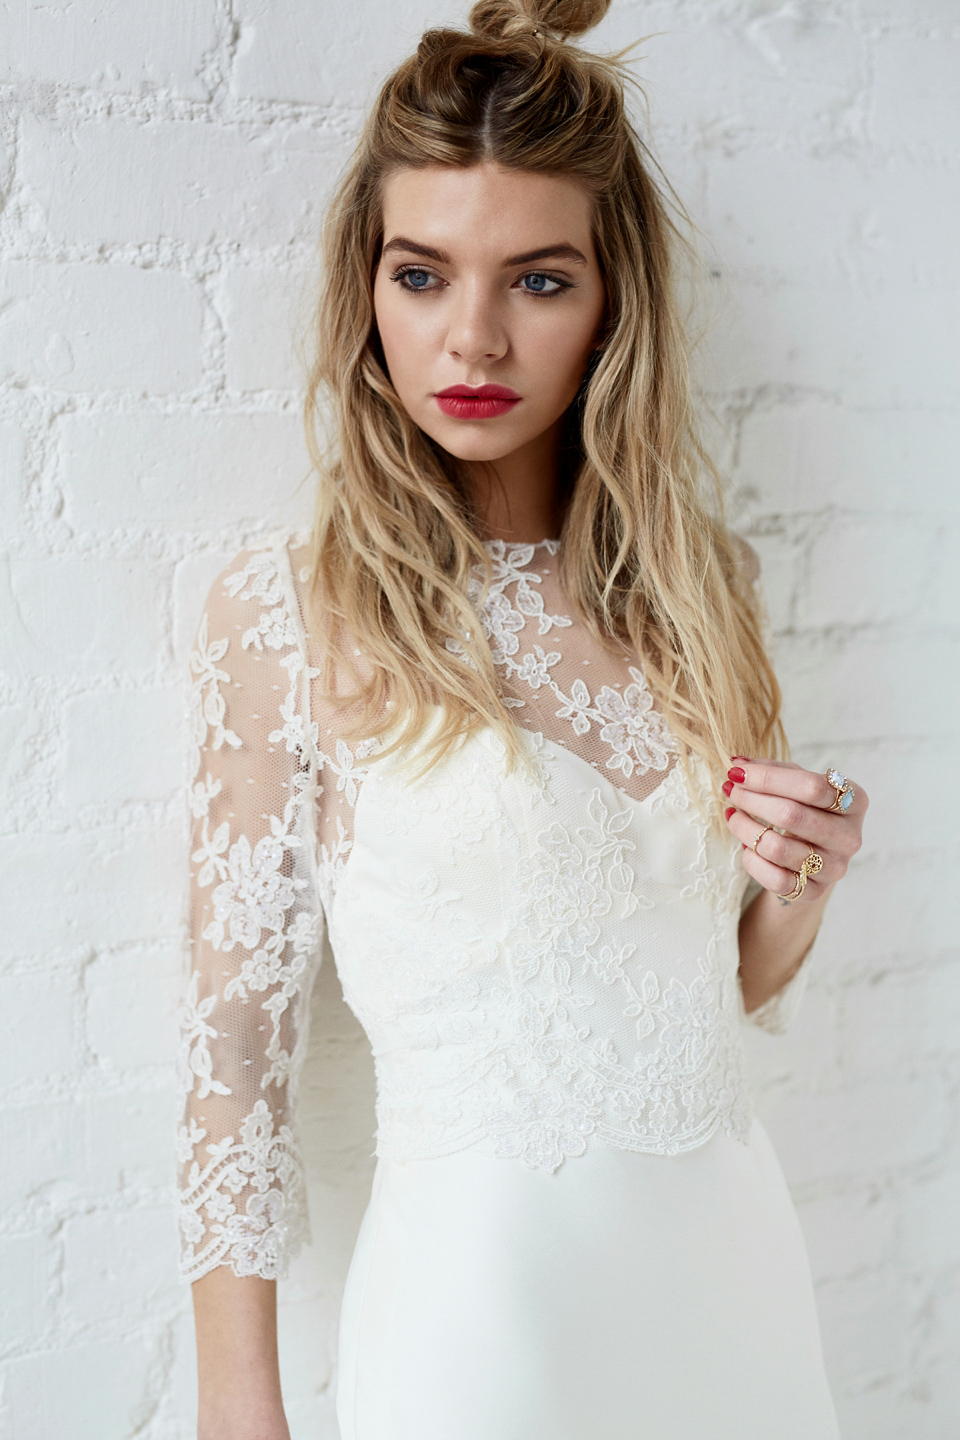 Meet Charlotte Balbier at The Little Pearl Bridal Boutique in Pickering, North Yorkshire, on 30th January 2016.